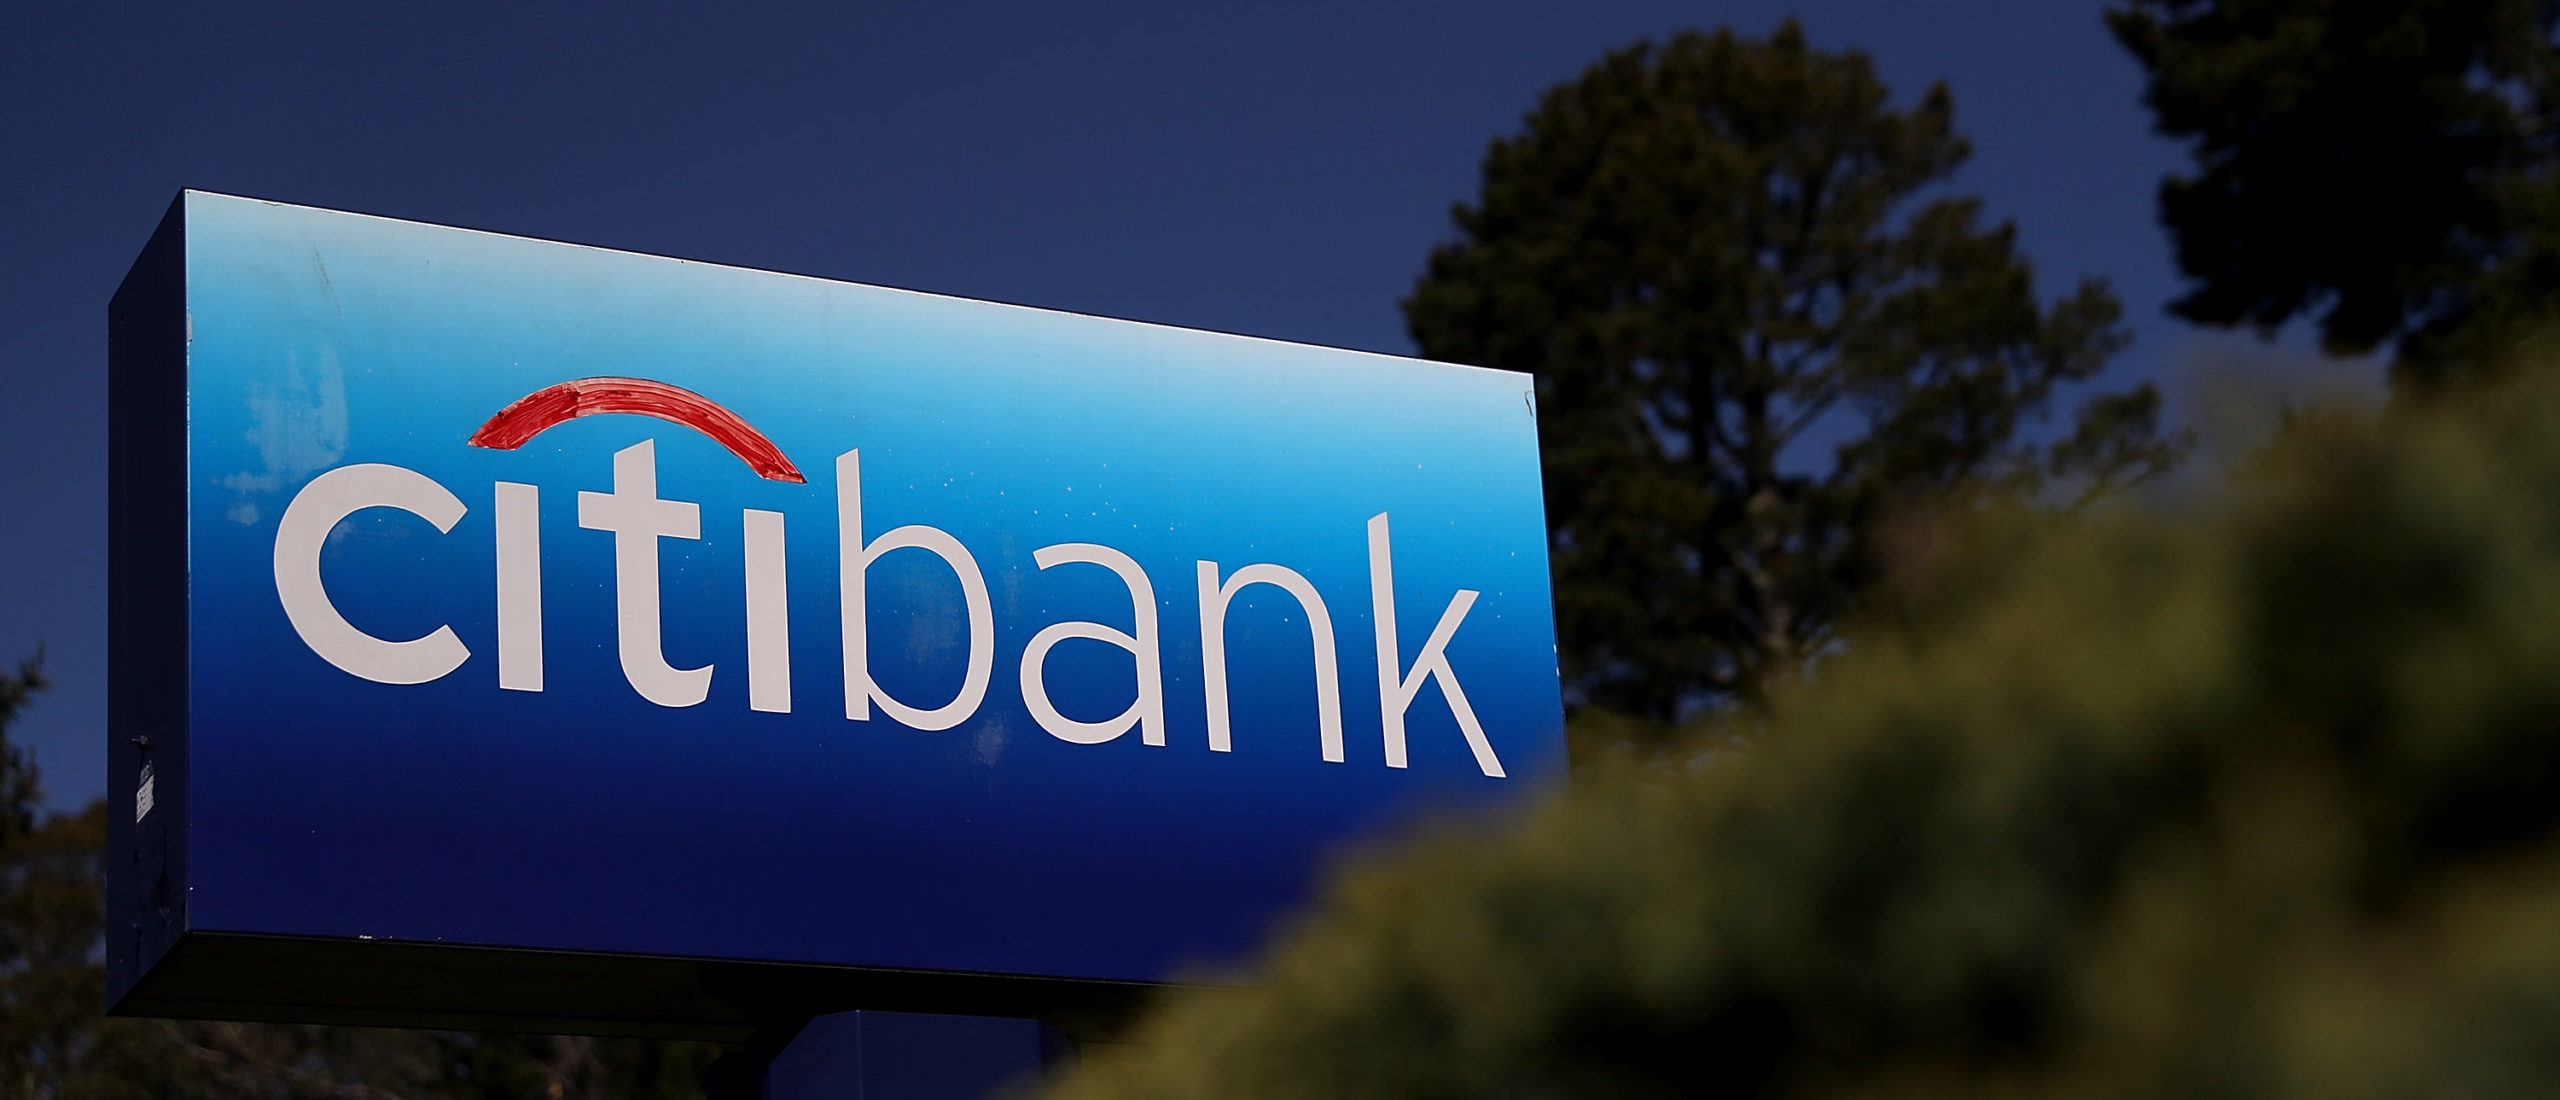 MILL VALLEY, CA - APRIL 13: A sign is posted in front of a Citibank office on April 13, 2018 in Mill Valley, California. (Photo by Justin Sullivan/Getty Images)